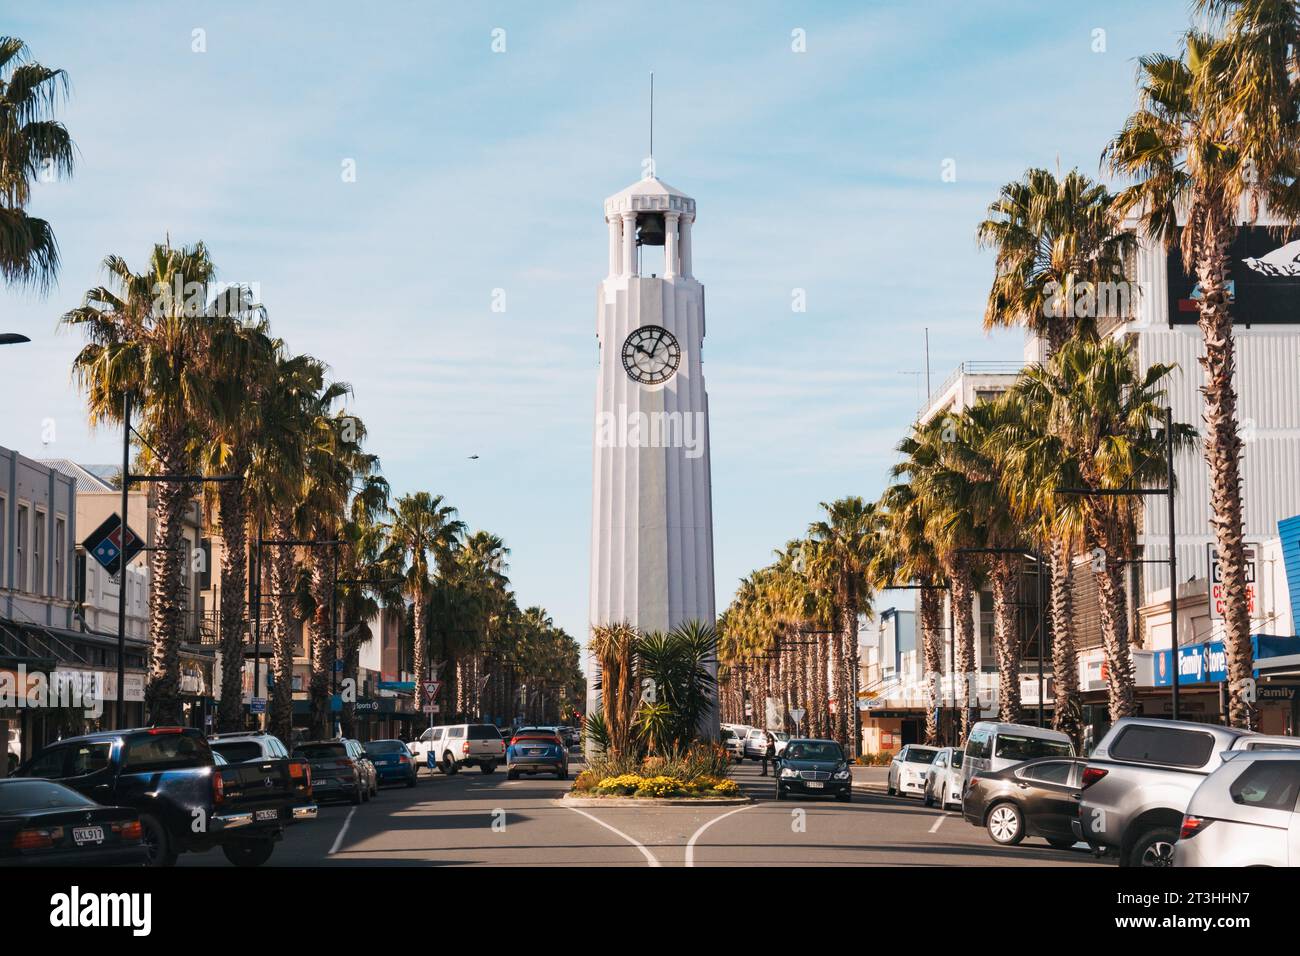 The Gisborne Town Clock in the city of Gisborne, New Zealand. Built in 1934, now a heritage structure Stock Photo